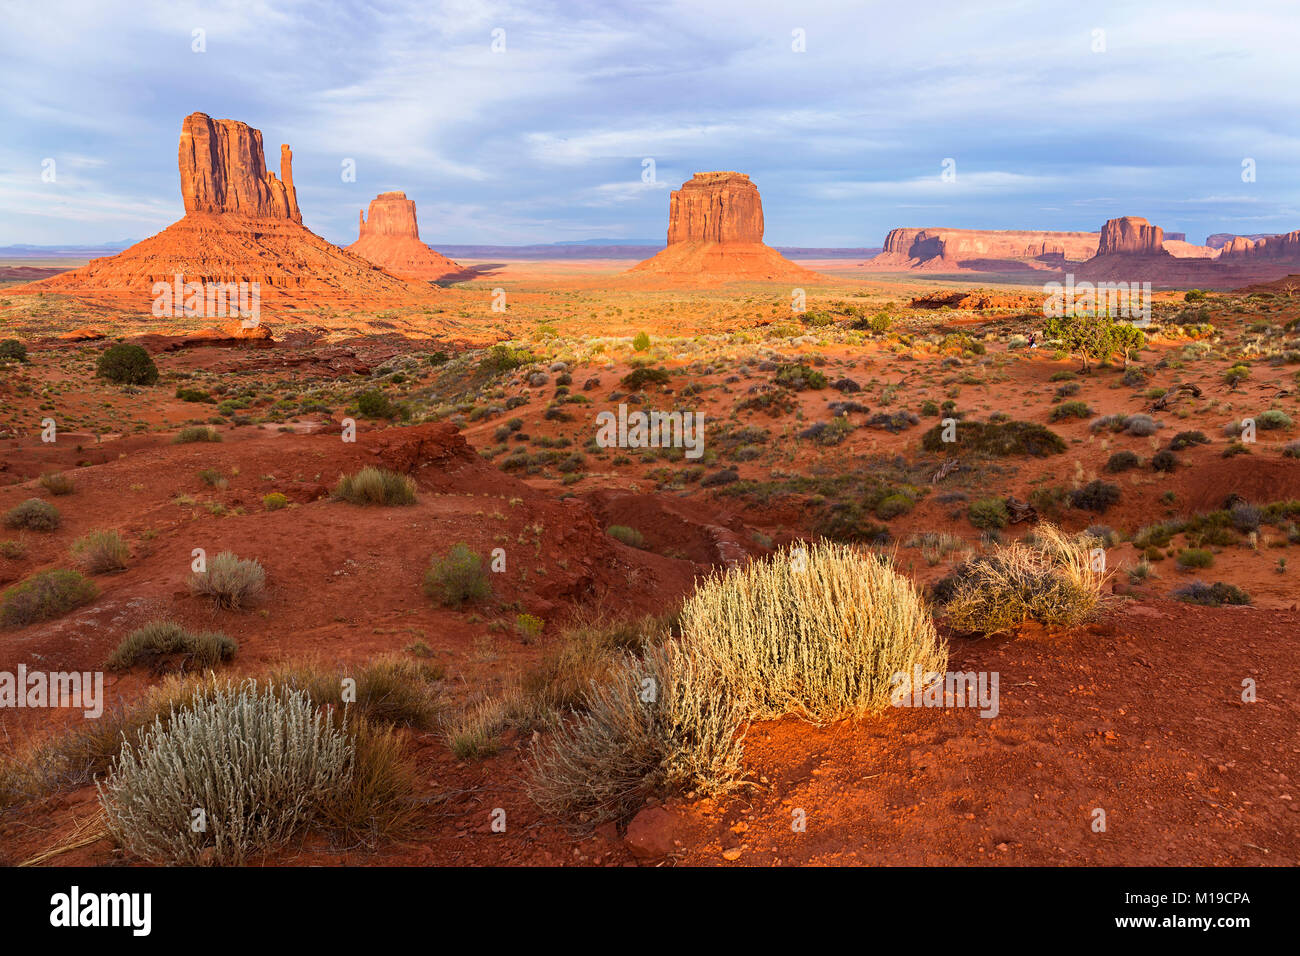 Sunset view at Monument Valley, Navajo Nation, USA Stock Photo